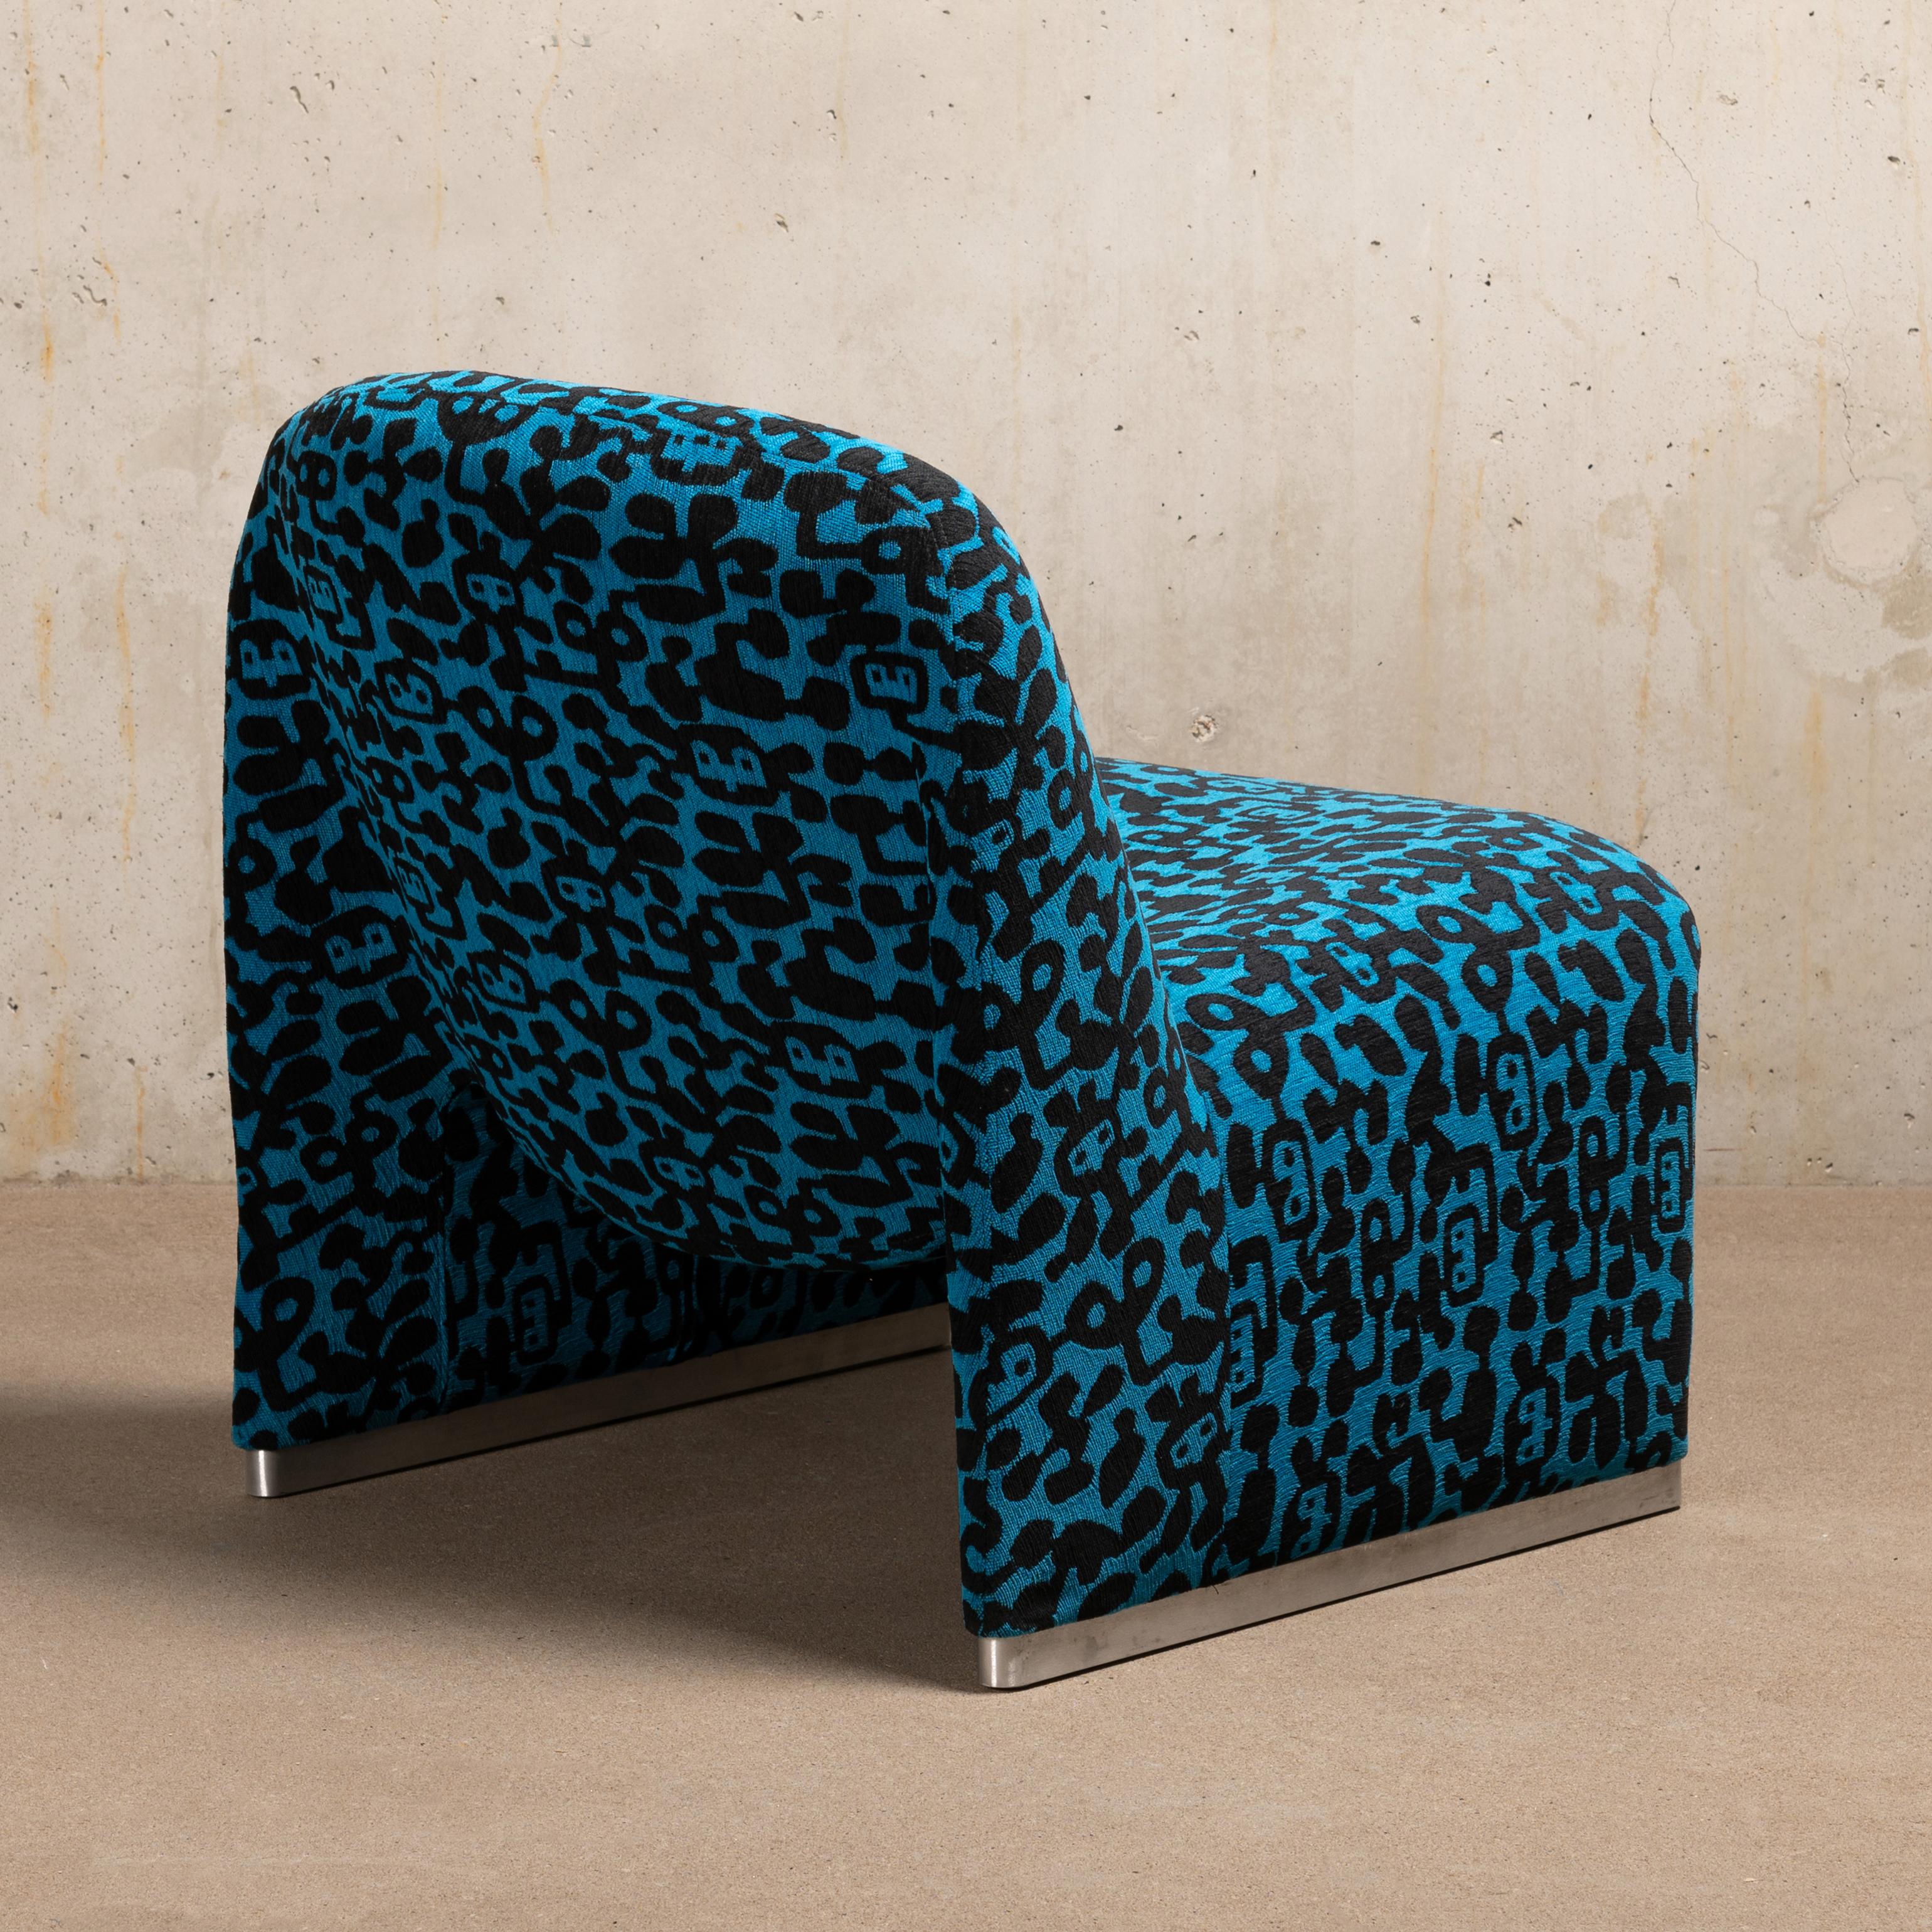 Late 20th Century Giancarlo Piretti Alky Lounge Chair in Blue Fabric with Black Pattern, Artifort